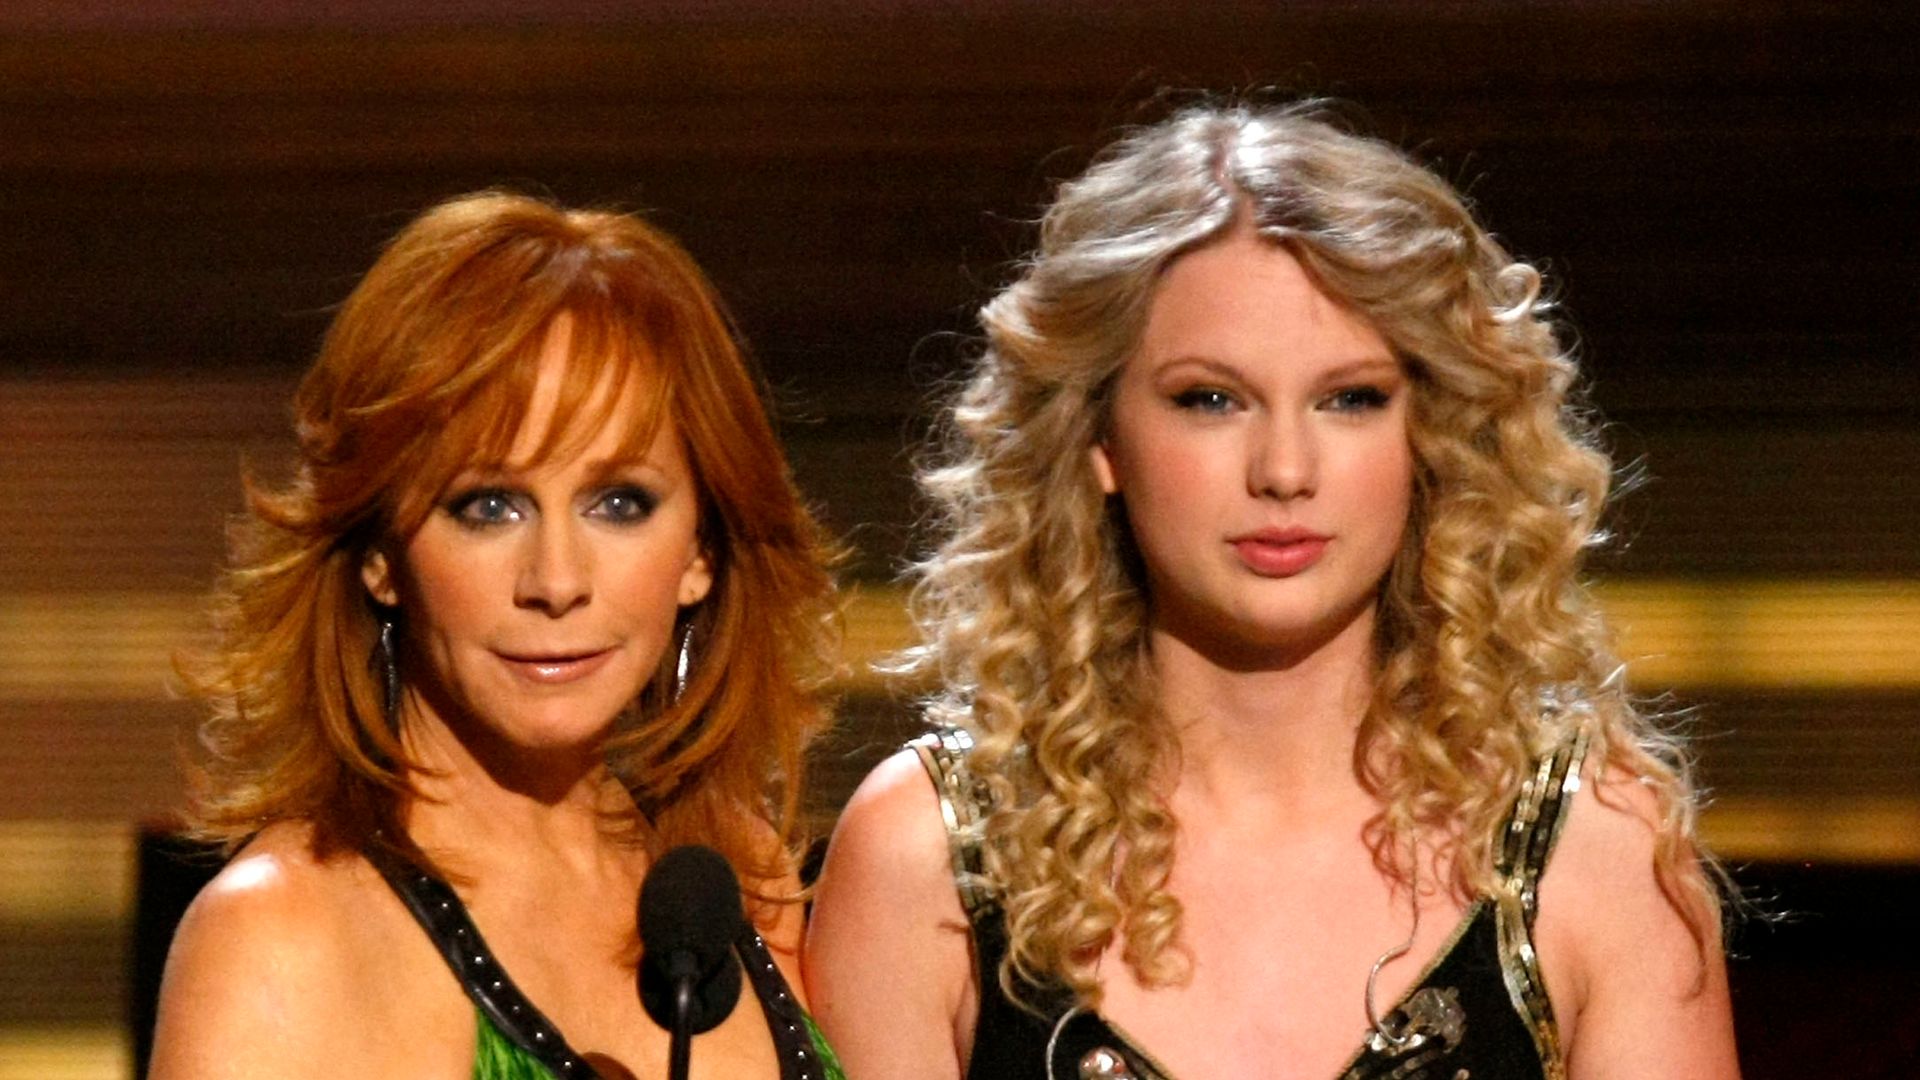 Reba McEntire addresses claims she called Taylor Swift 'an entitled little brat'  – what she said